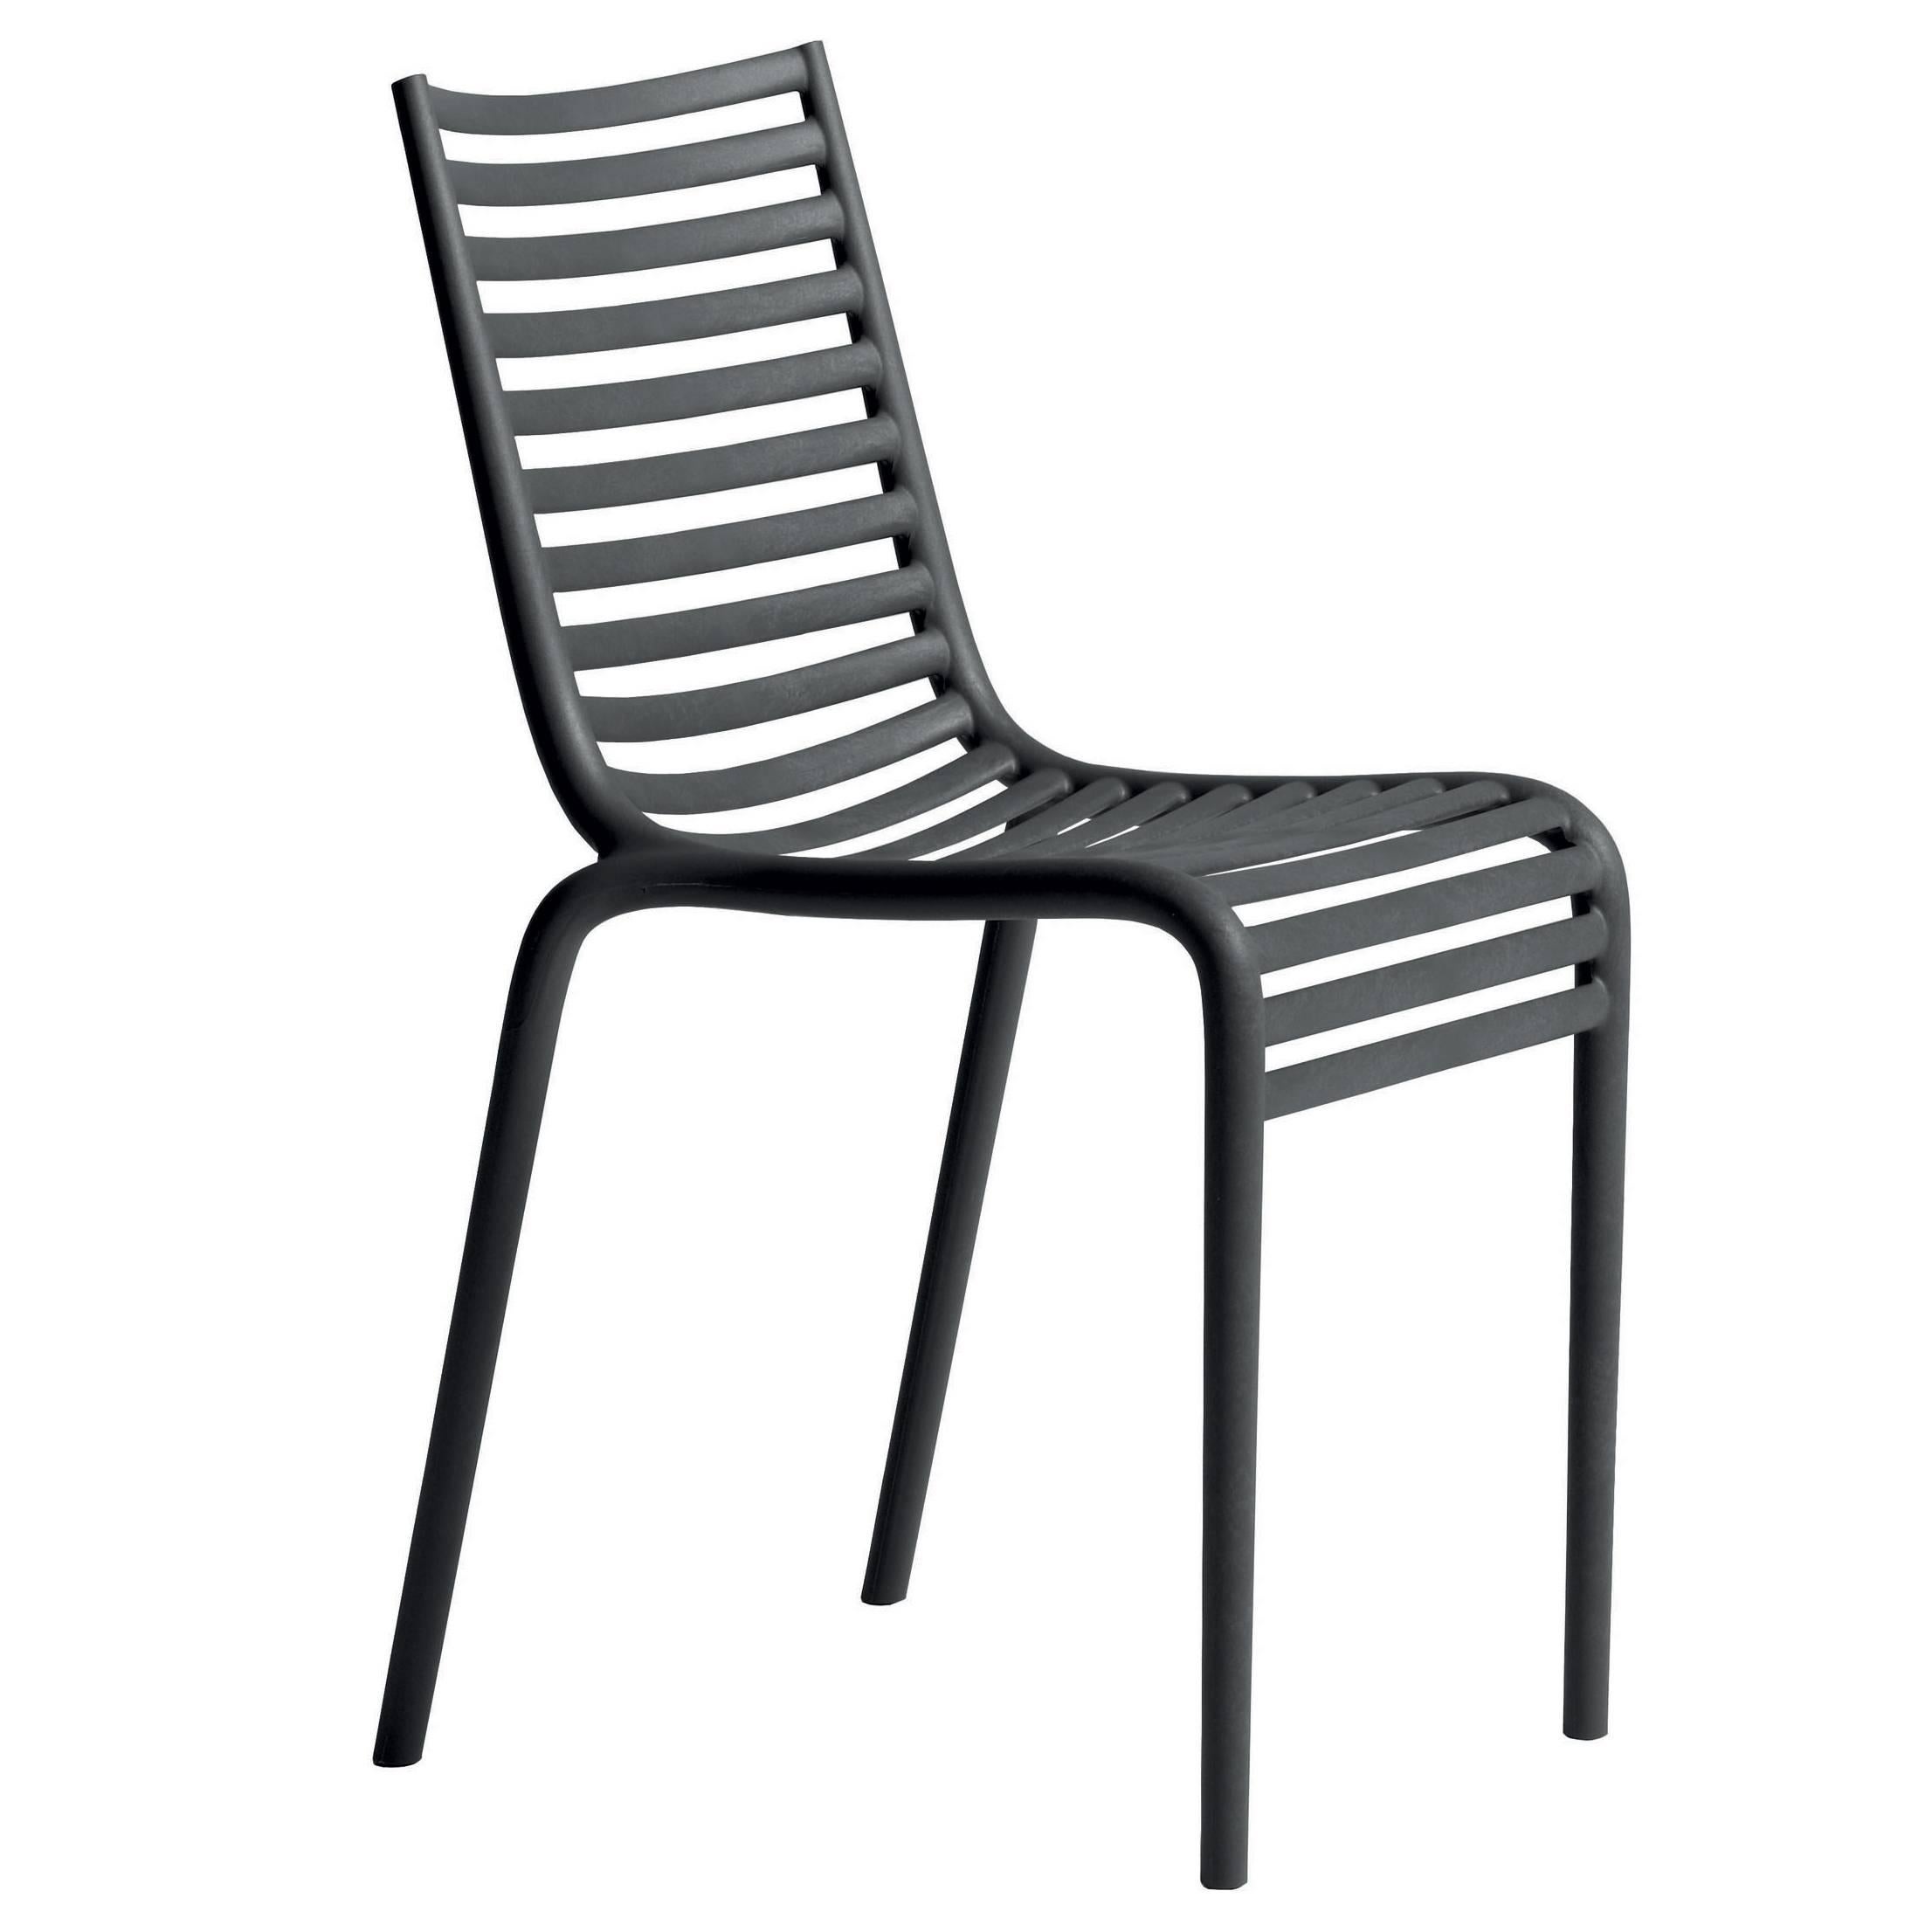 "PIP-e" Stackable Outdoor Chair Designed by Philippe Starck for Driade For Sale